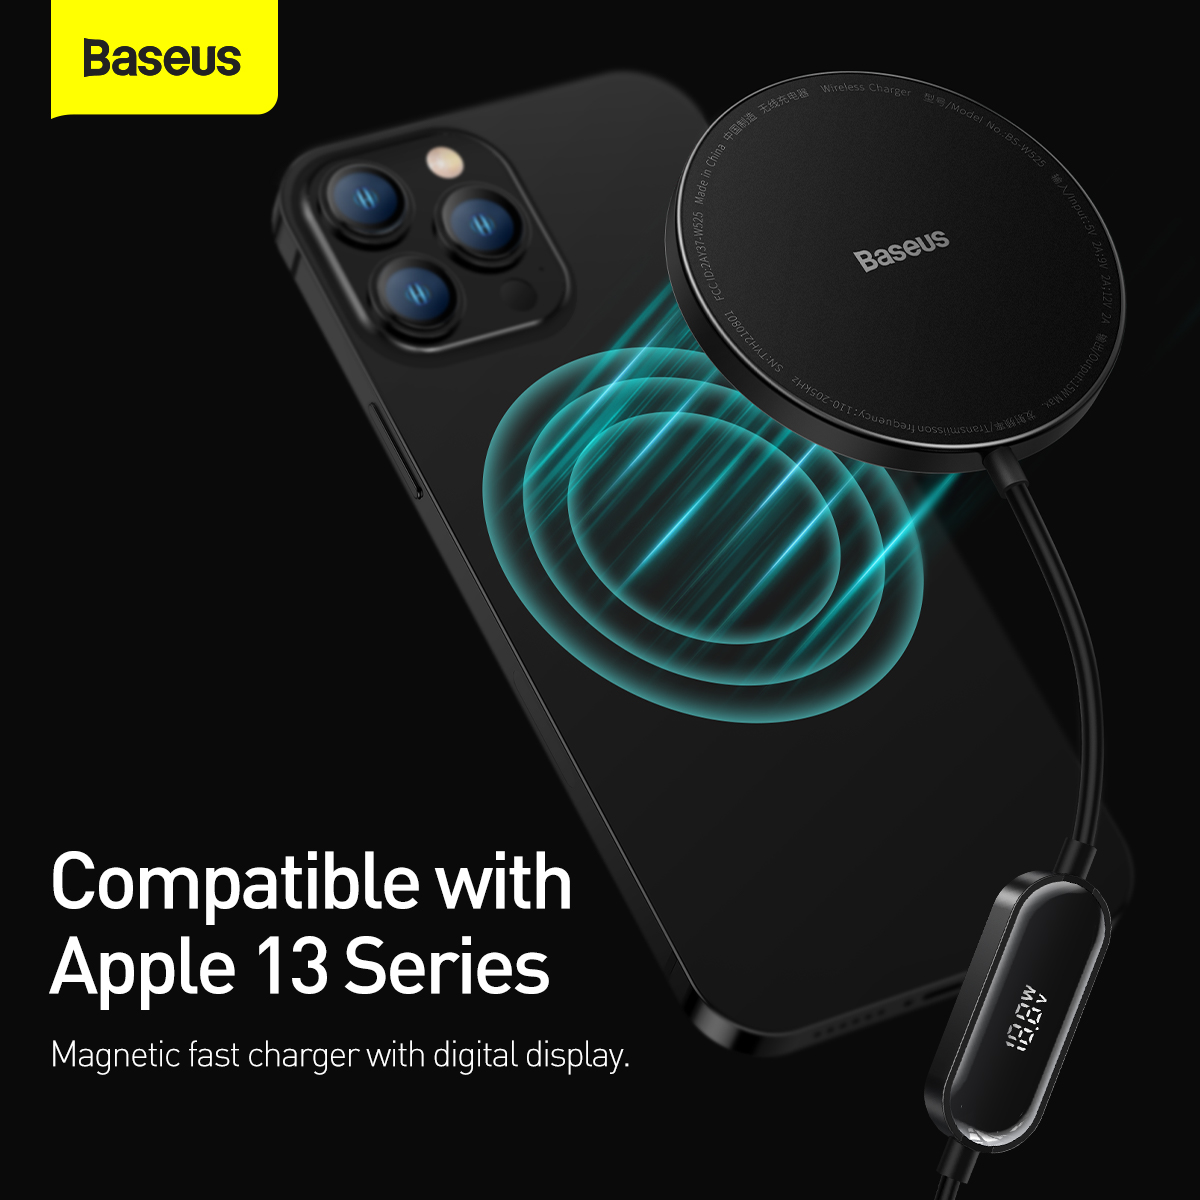 Baseus-Mini2-Magnetic-15W-Wireless-Charger-Fast-Wireless-Charging-Pad-For-Qi-enabled-Smart-Phones-fo-1917041-3